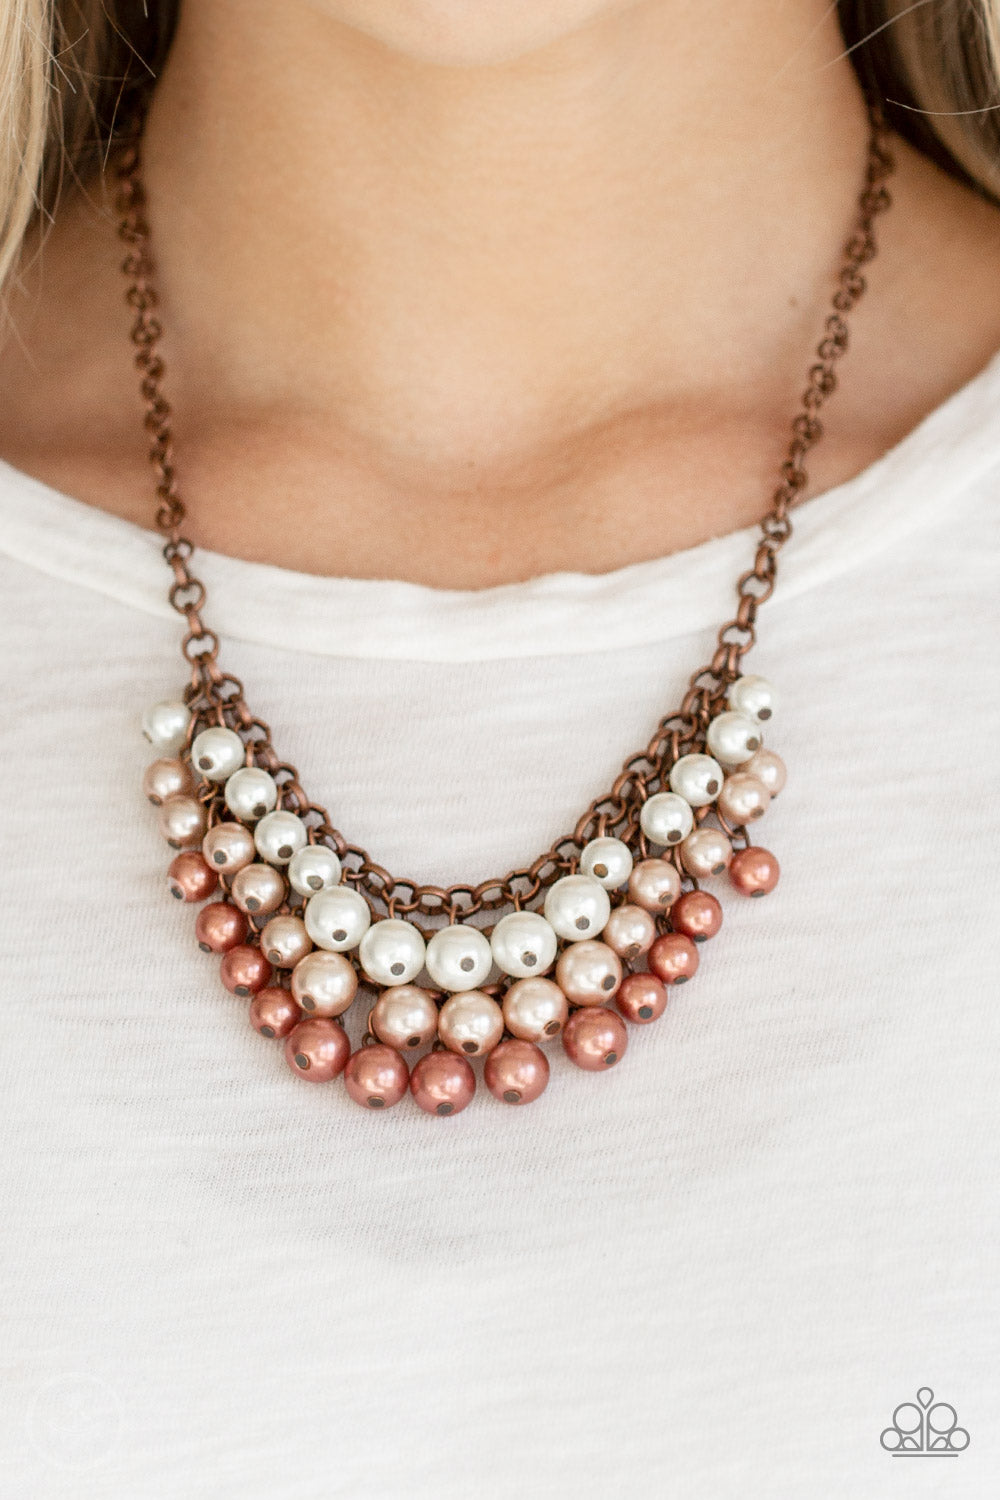 RUN FOR THE HEELS! - COPPER OMBRE PEARLS NECKLACE